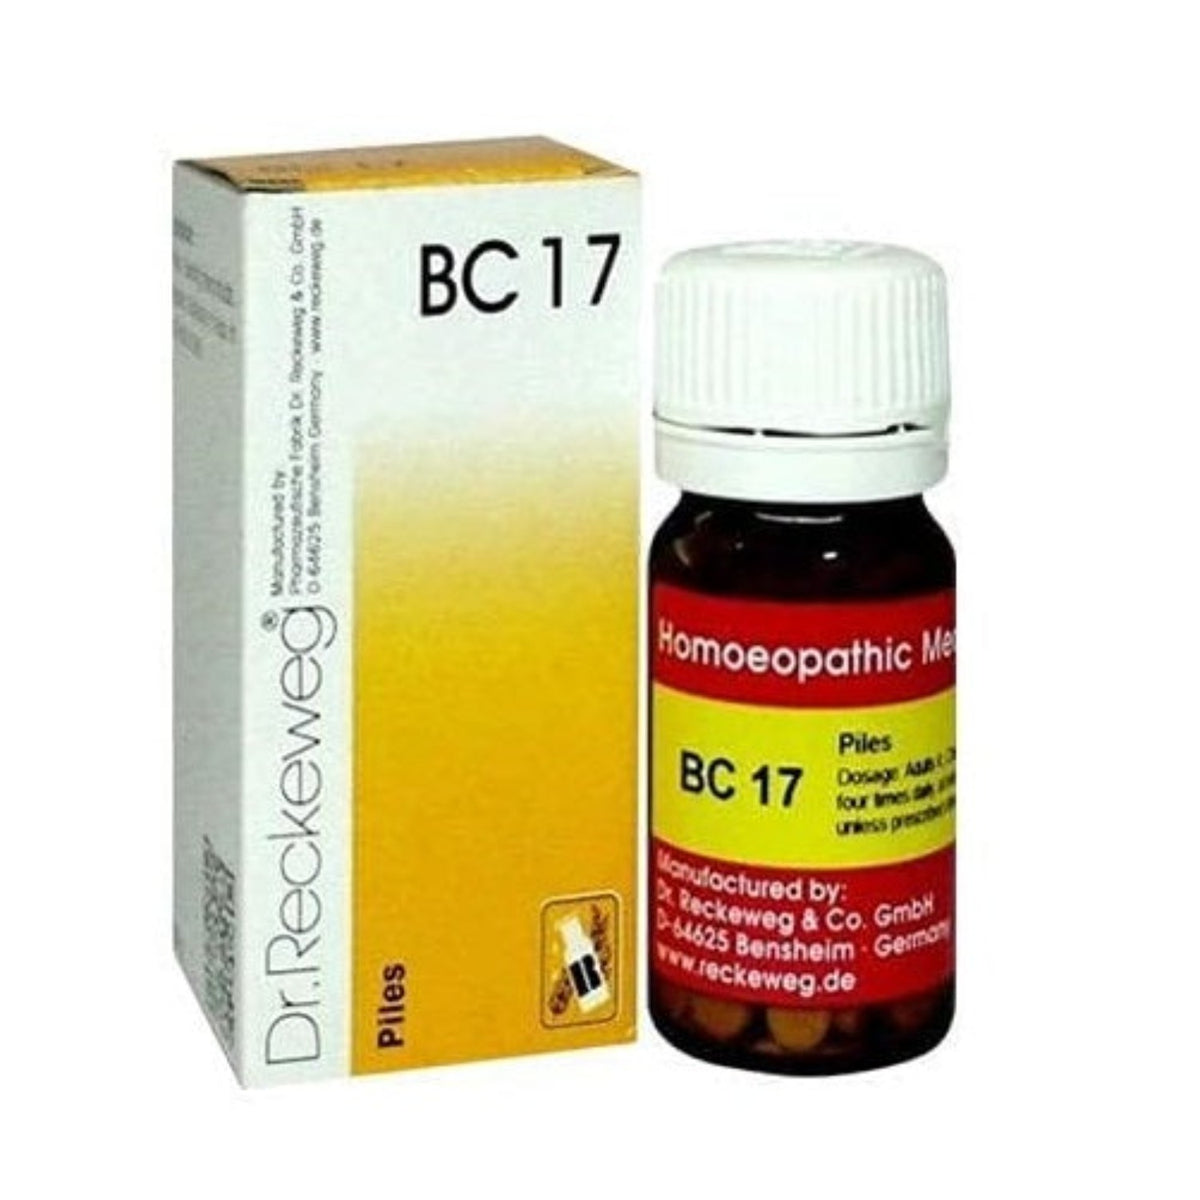 Dr Reckeweg Homoeopathy Piles Bio-Combination 17 (BC 17) 20gm Tablet